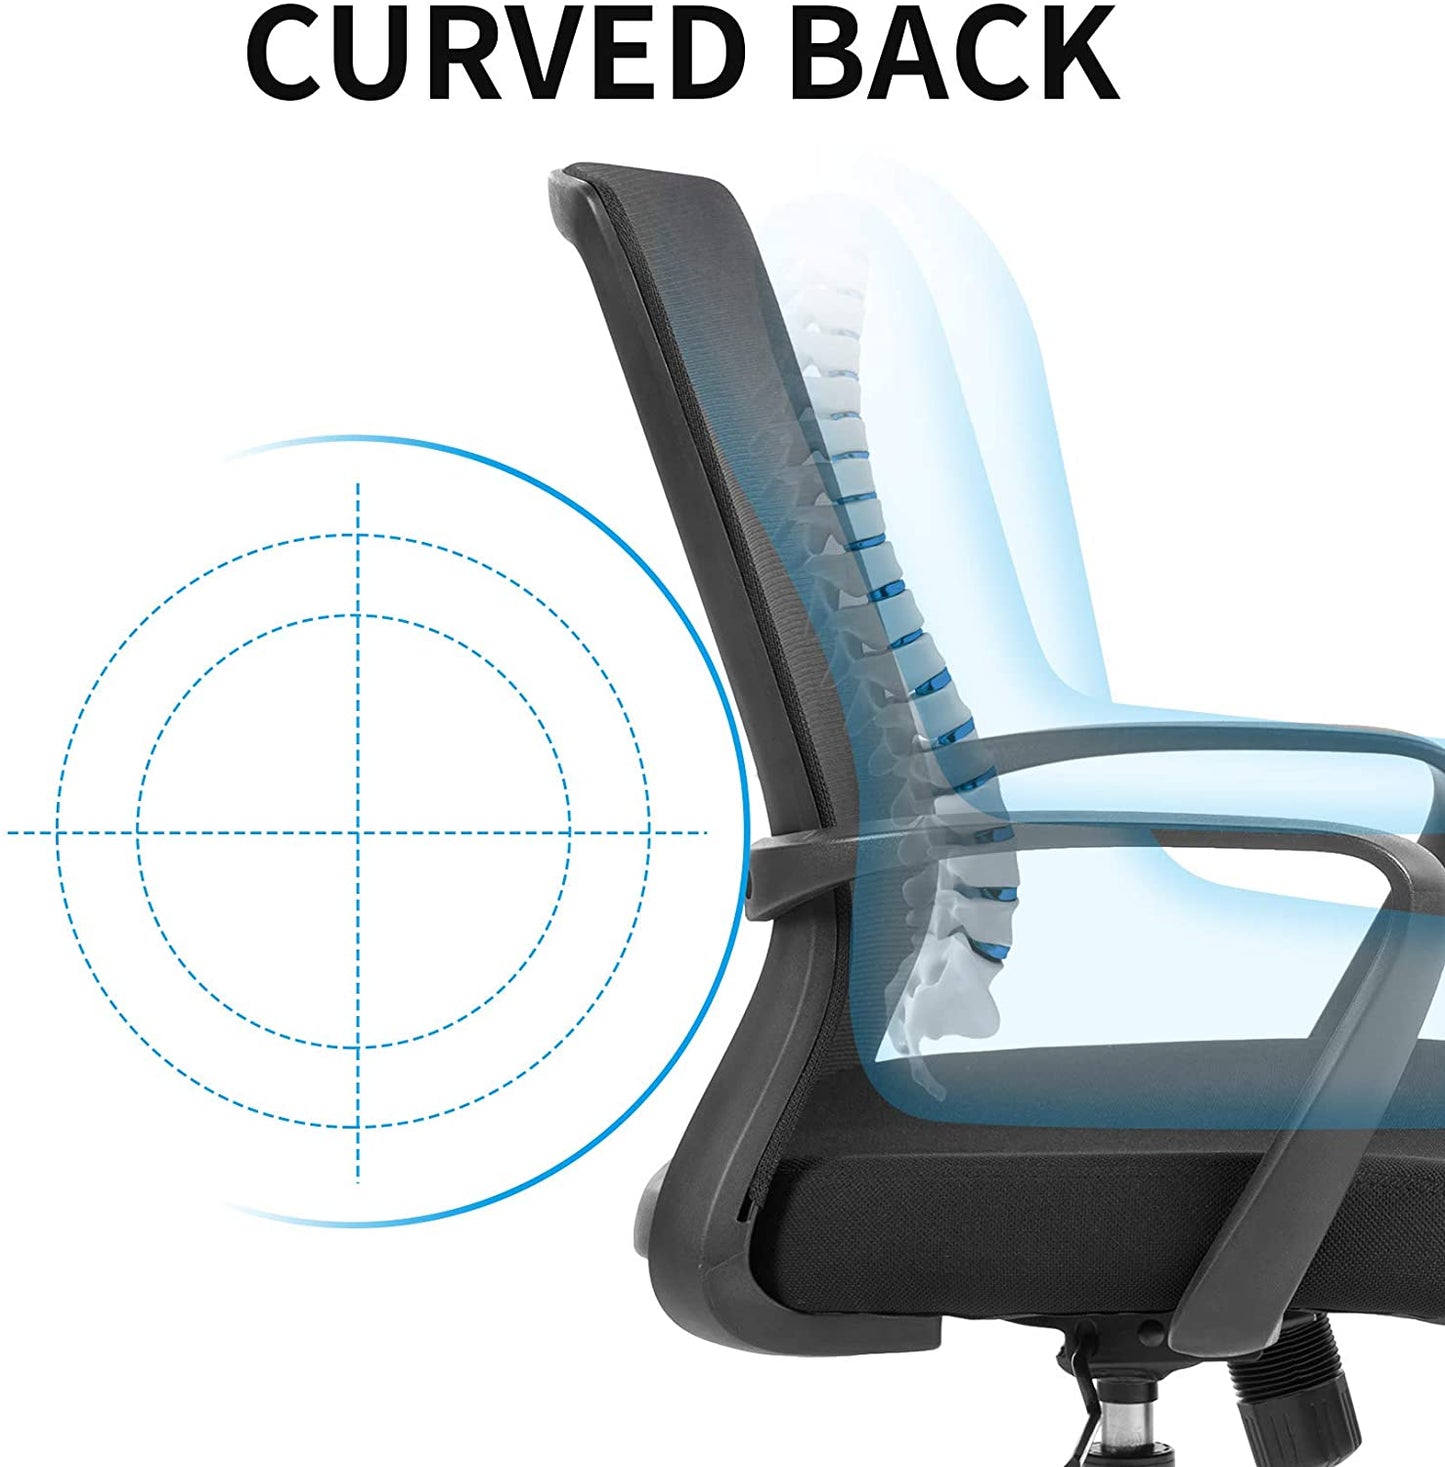 UNICOO – Home Office Chair Ergonomic Mid-Back Swivel Chair, Mesh Computer Chair, Office Task Desk Chair, Home Comfort Chairs with Armrests (W-208-1 Black)